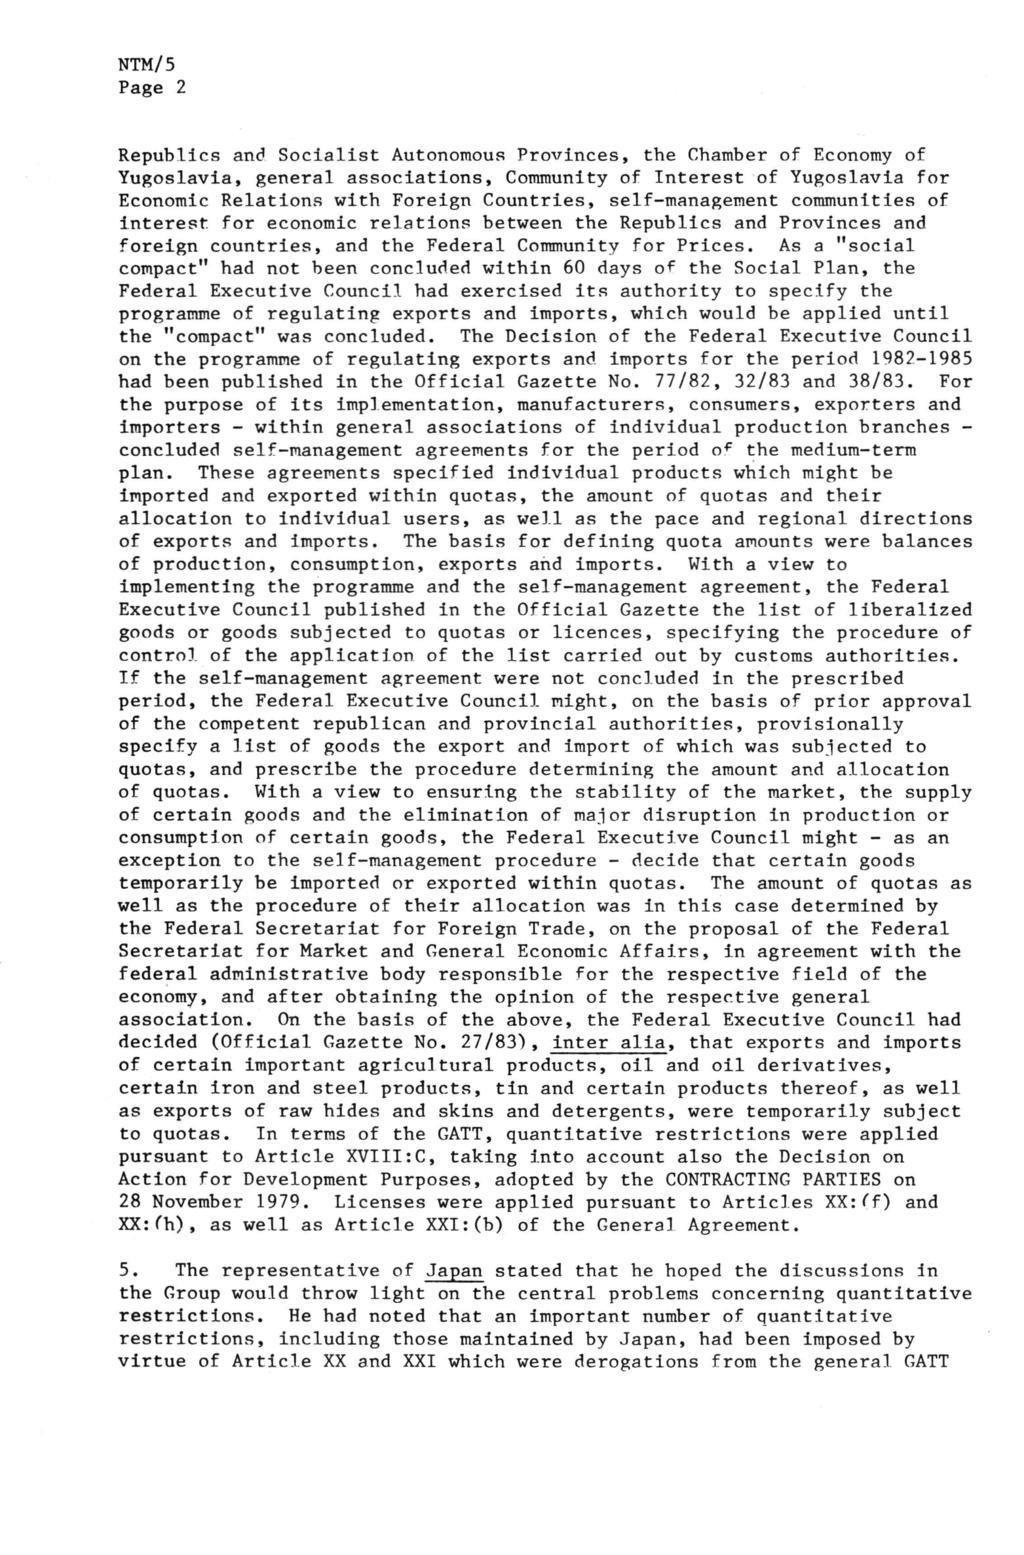 Page 2 Republics and Socialist Autonomous Provinces, the Chamber of Economy of Yugoslavia, general associations, Community of Interest of Yugoslavia for Economic Relations with Foreign Countries,